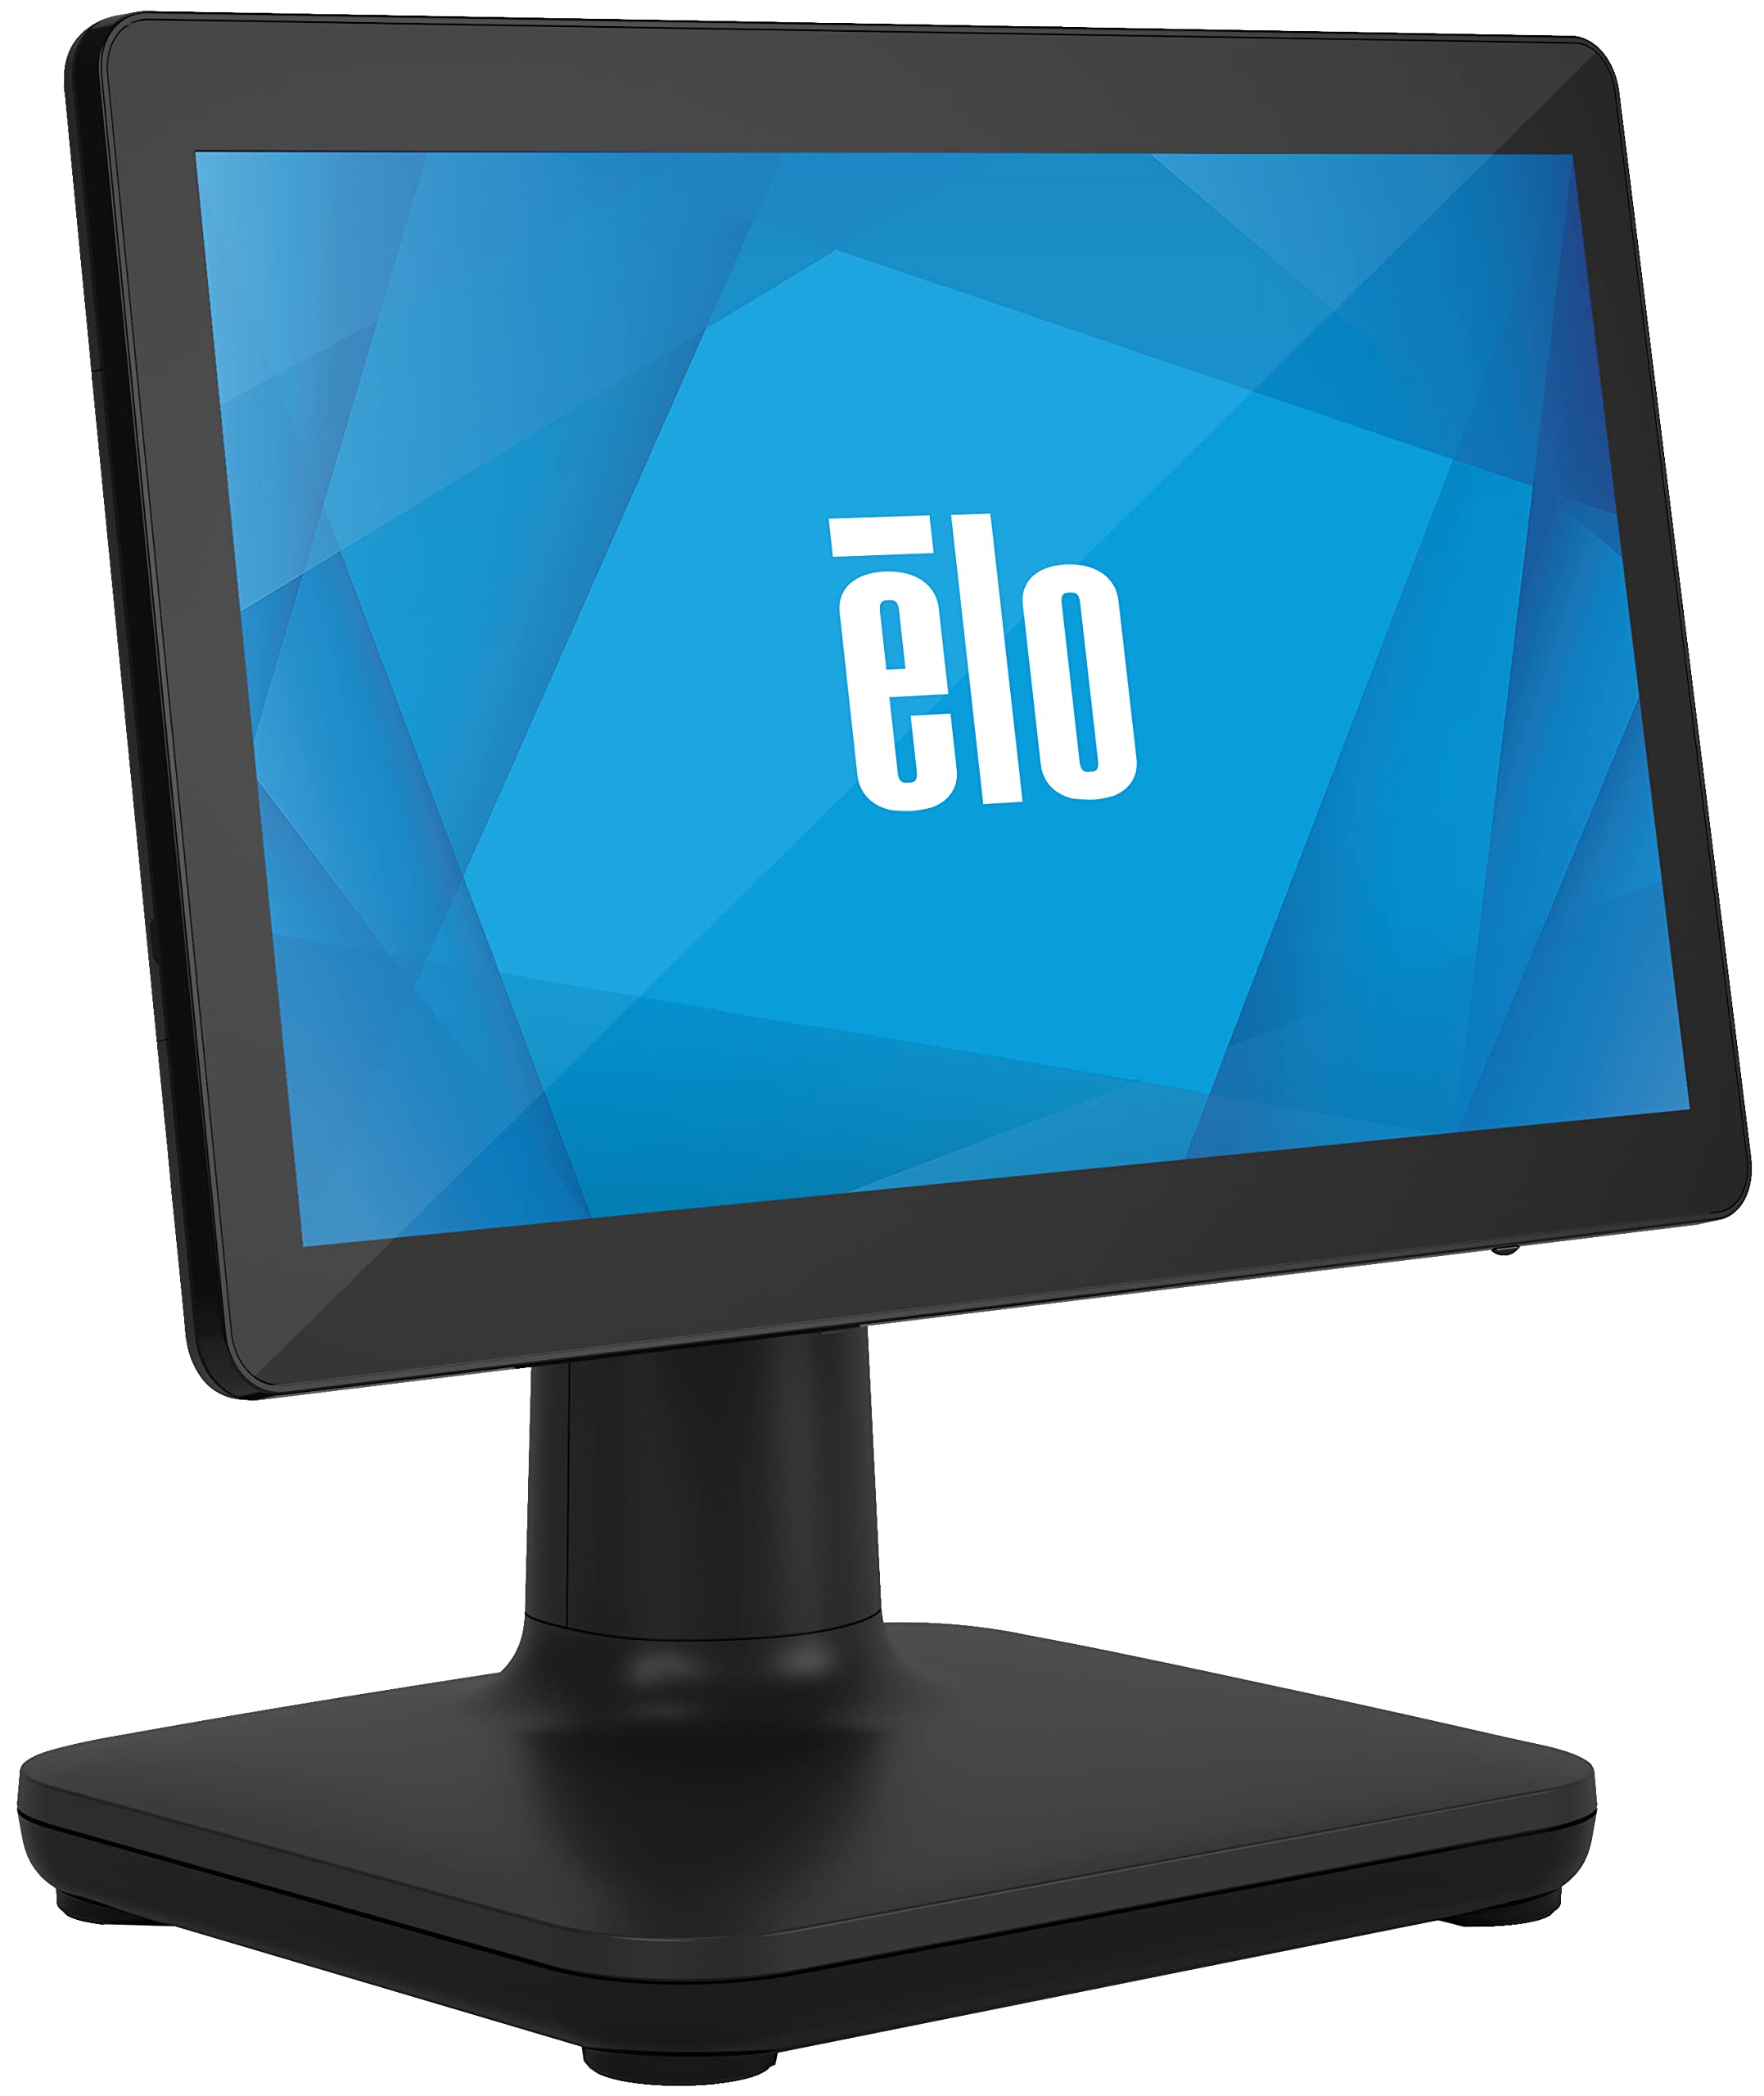 Elo EloPOS 15" Point of Sale System, 15-inch Touchscreen with i5, Win 10, 8GB RAM, 128GB SSD, and Stand with Connection Hub